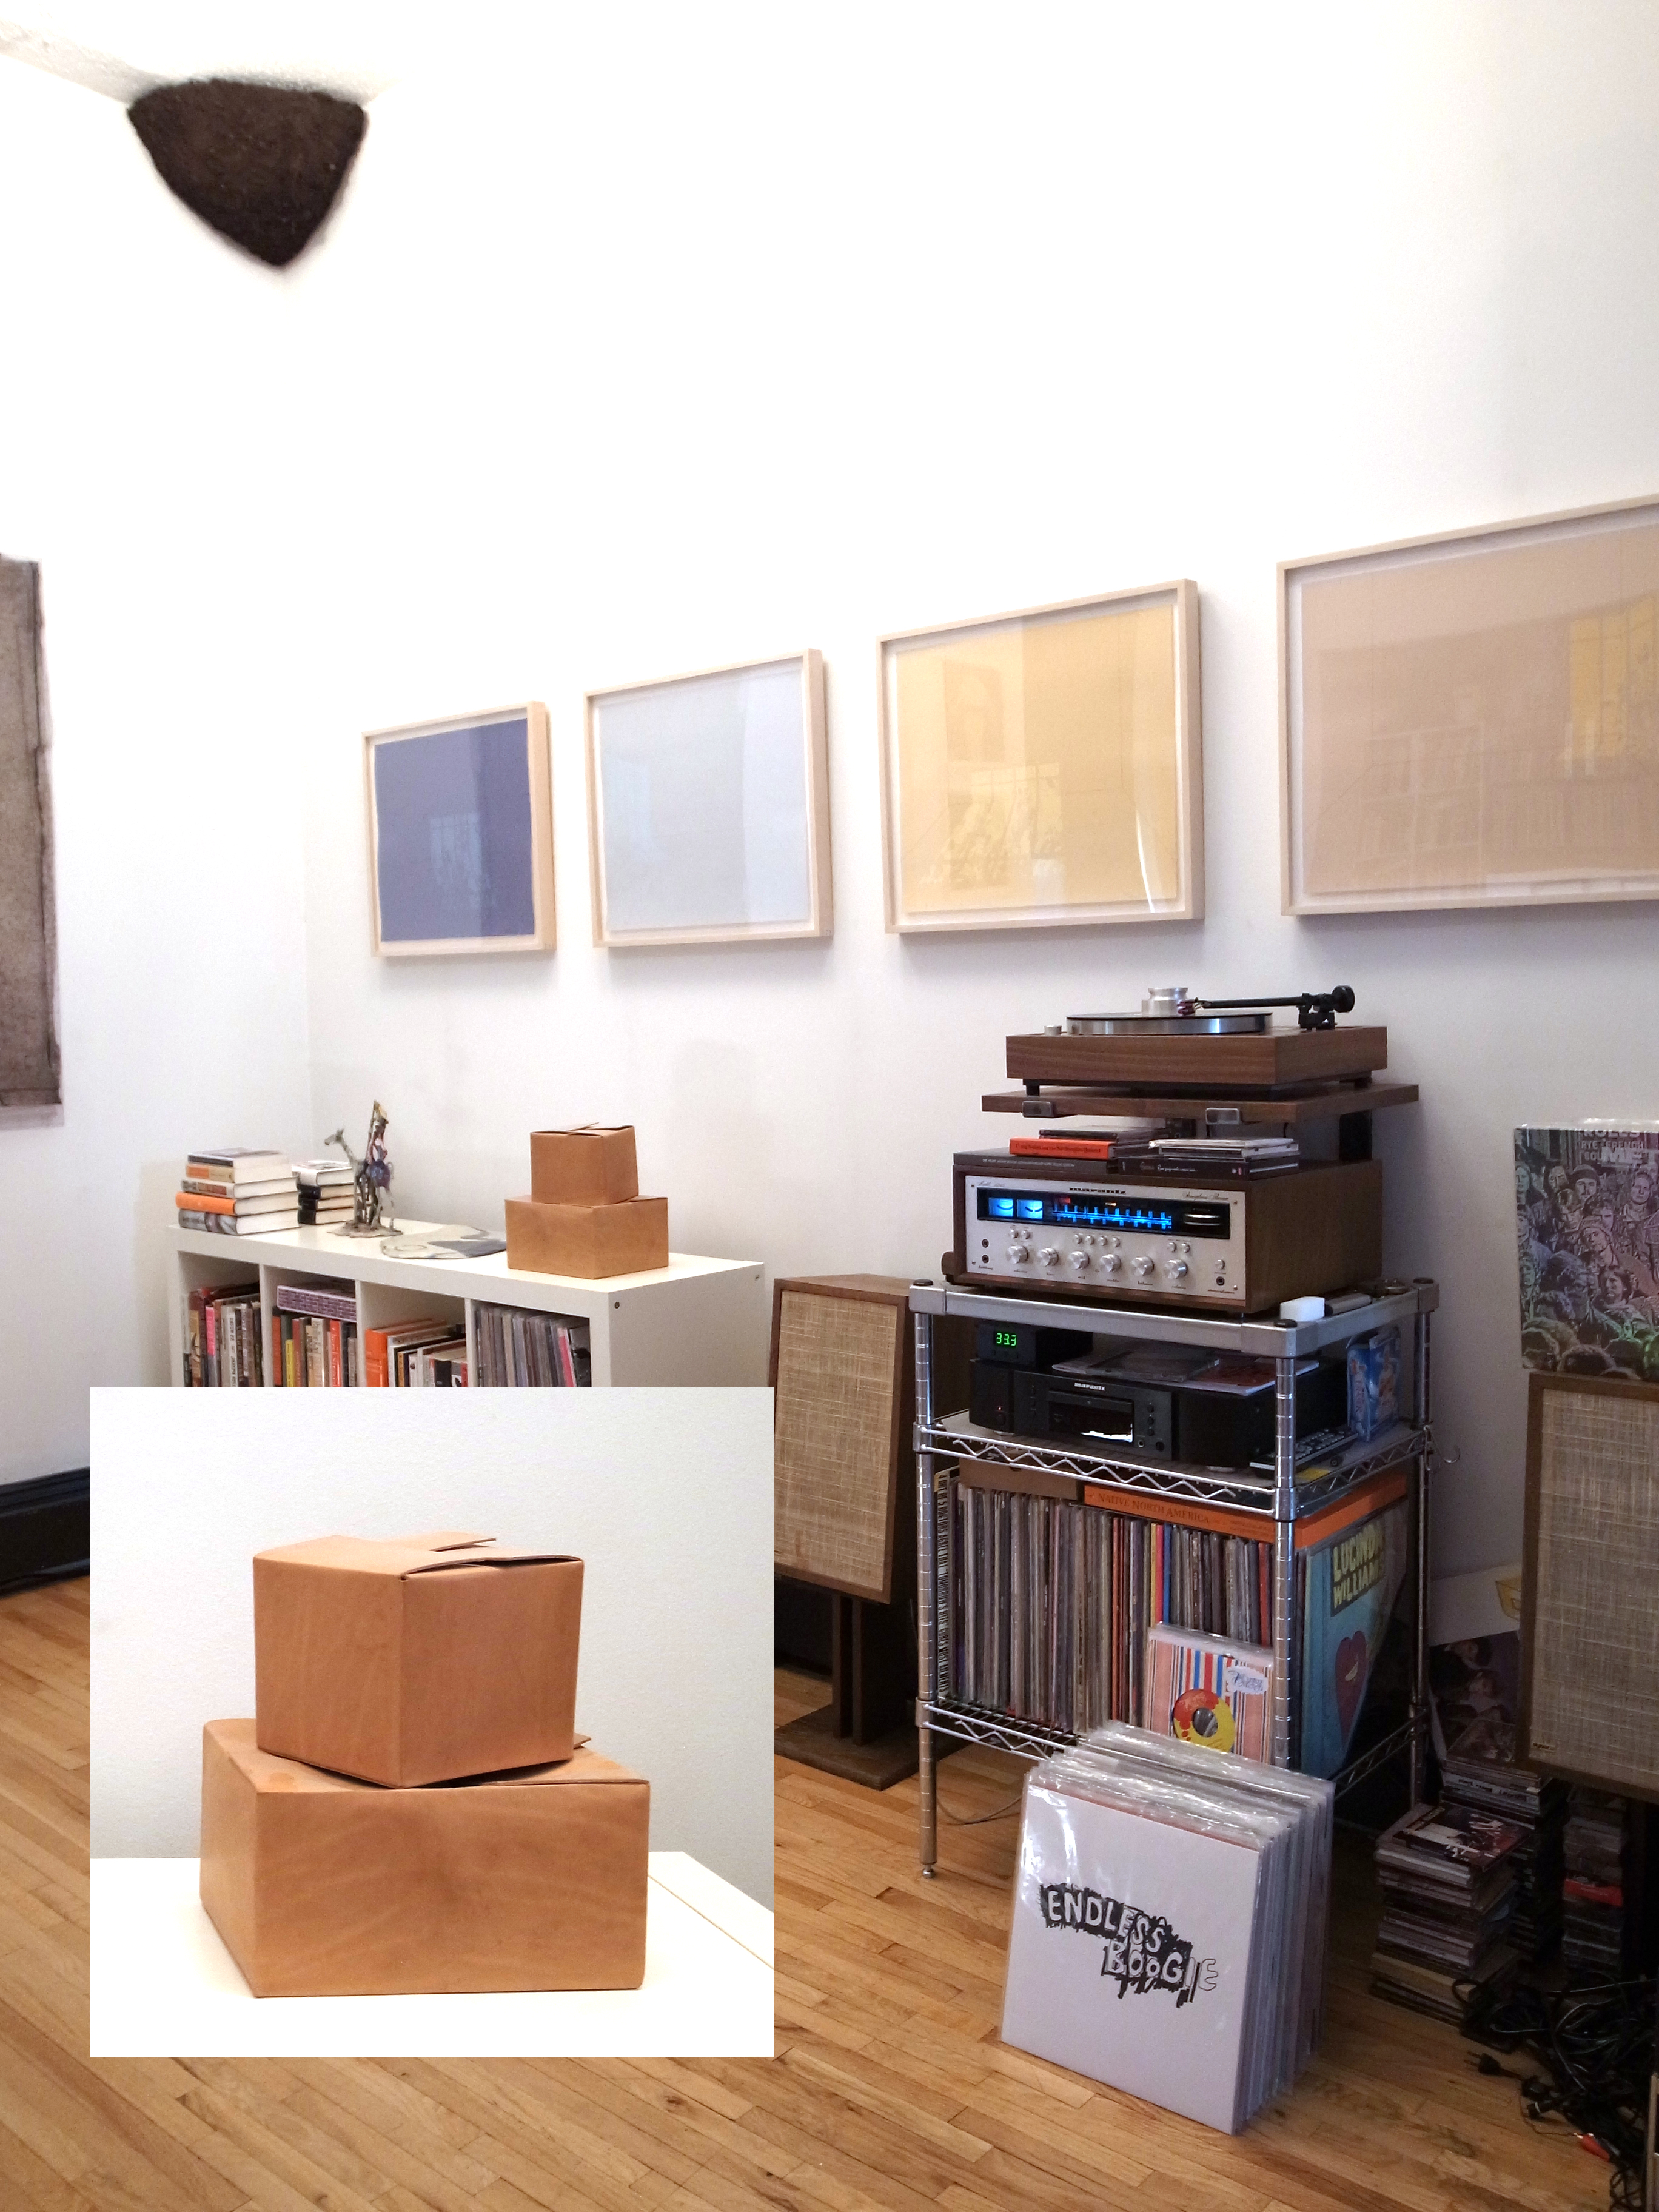 In the morning, my husband Kyle plays records. The records are starting to edge out the books, but we still have walls and some surfaces for art display – four Mary Temple prints, a David Kennedy Cutler "dirt corner" sculpture, Welcome Companions leather cardboard boxes, an old Don Quixote ceramic from my grandma, and a ceramic blobby plate by Sara Magenheimer. Books and lots of records.